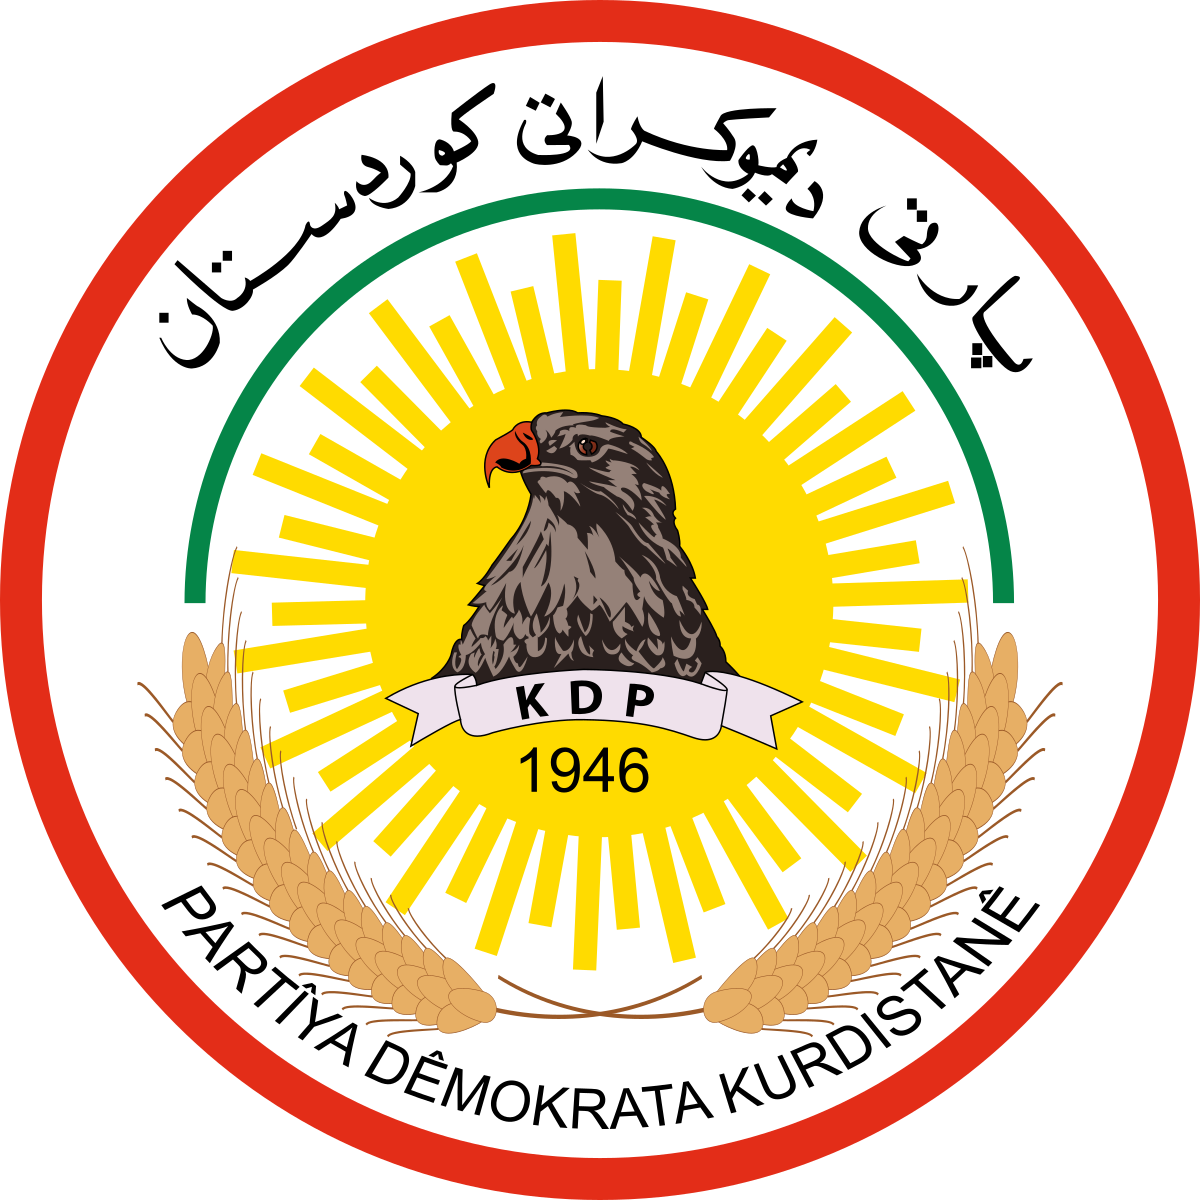 KDP takes firm lead in first official results, though complaints